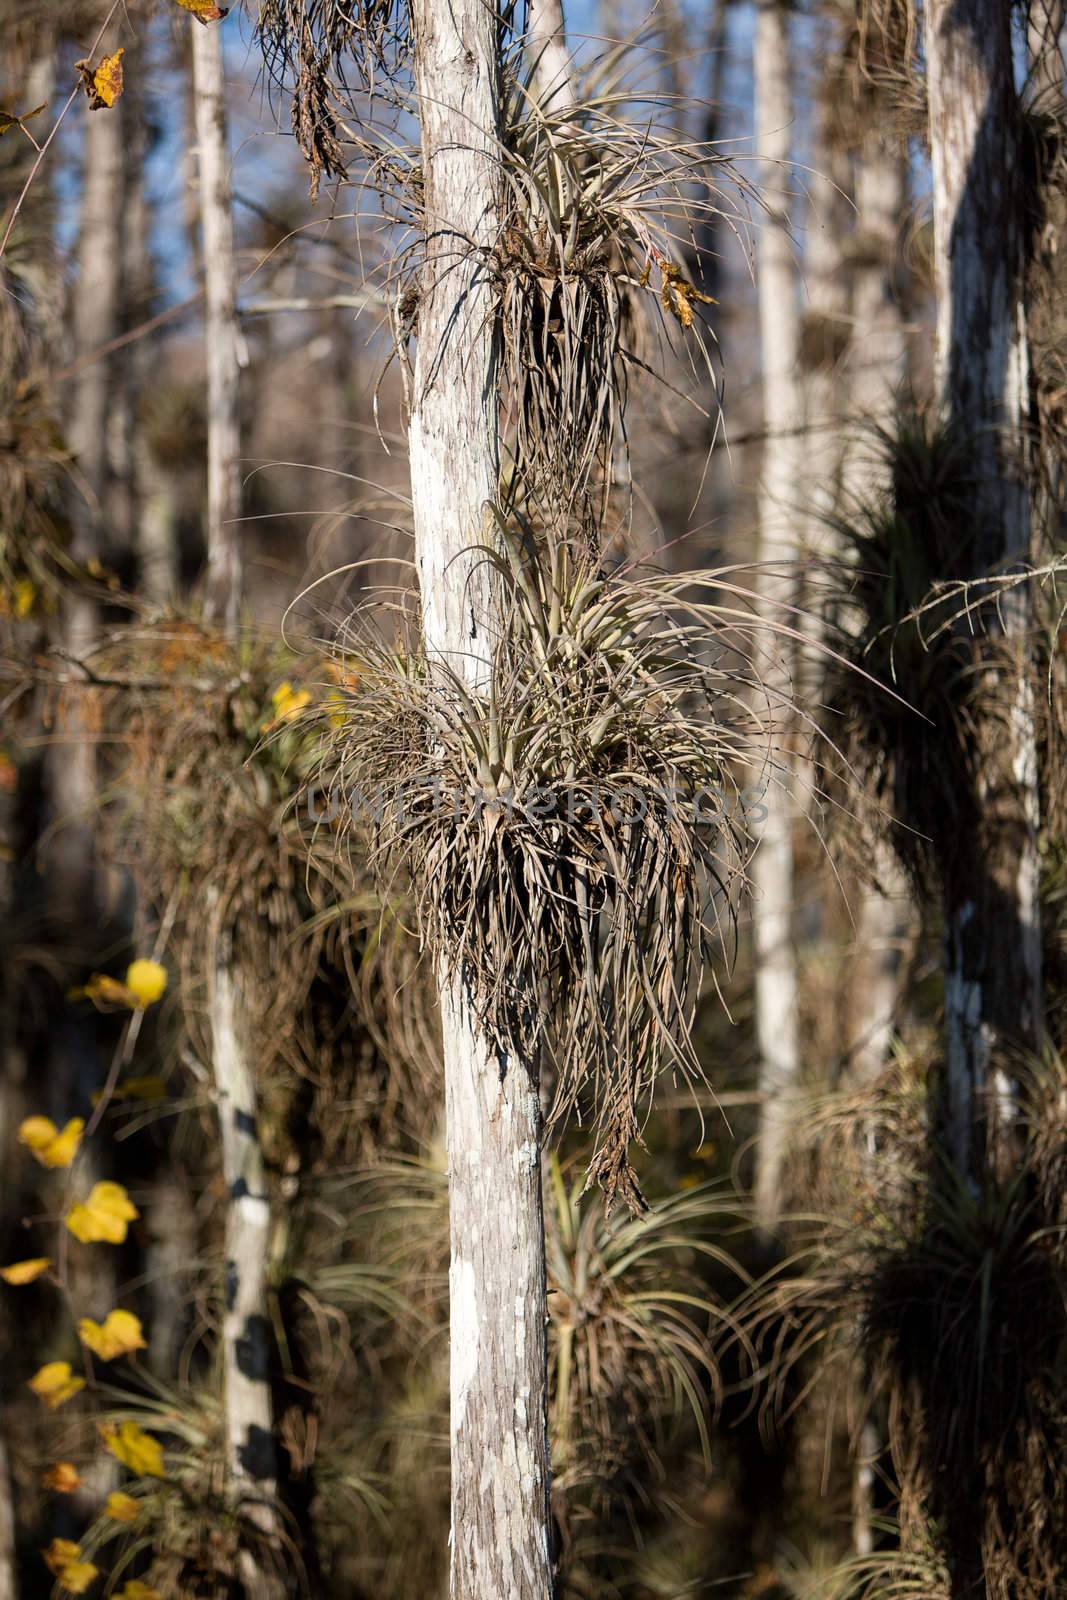 Cypress and other vegetation from the swamp of the Eveglades National Park in Florida